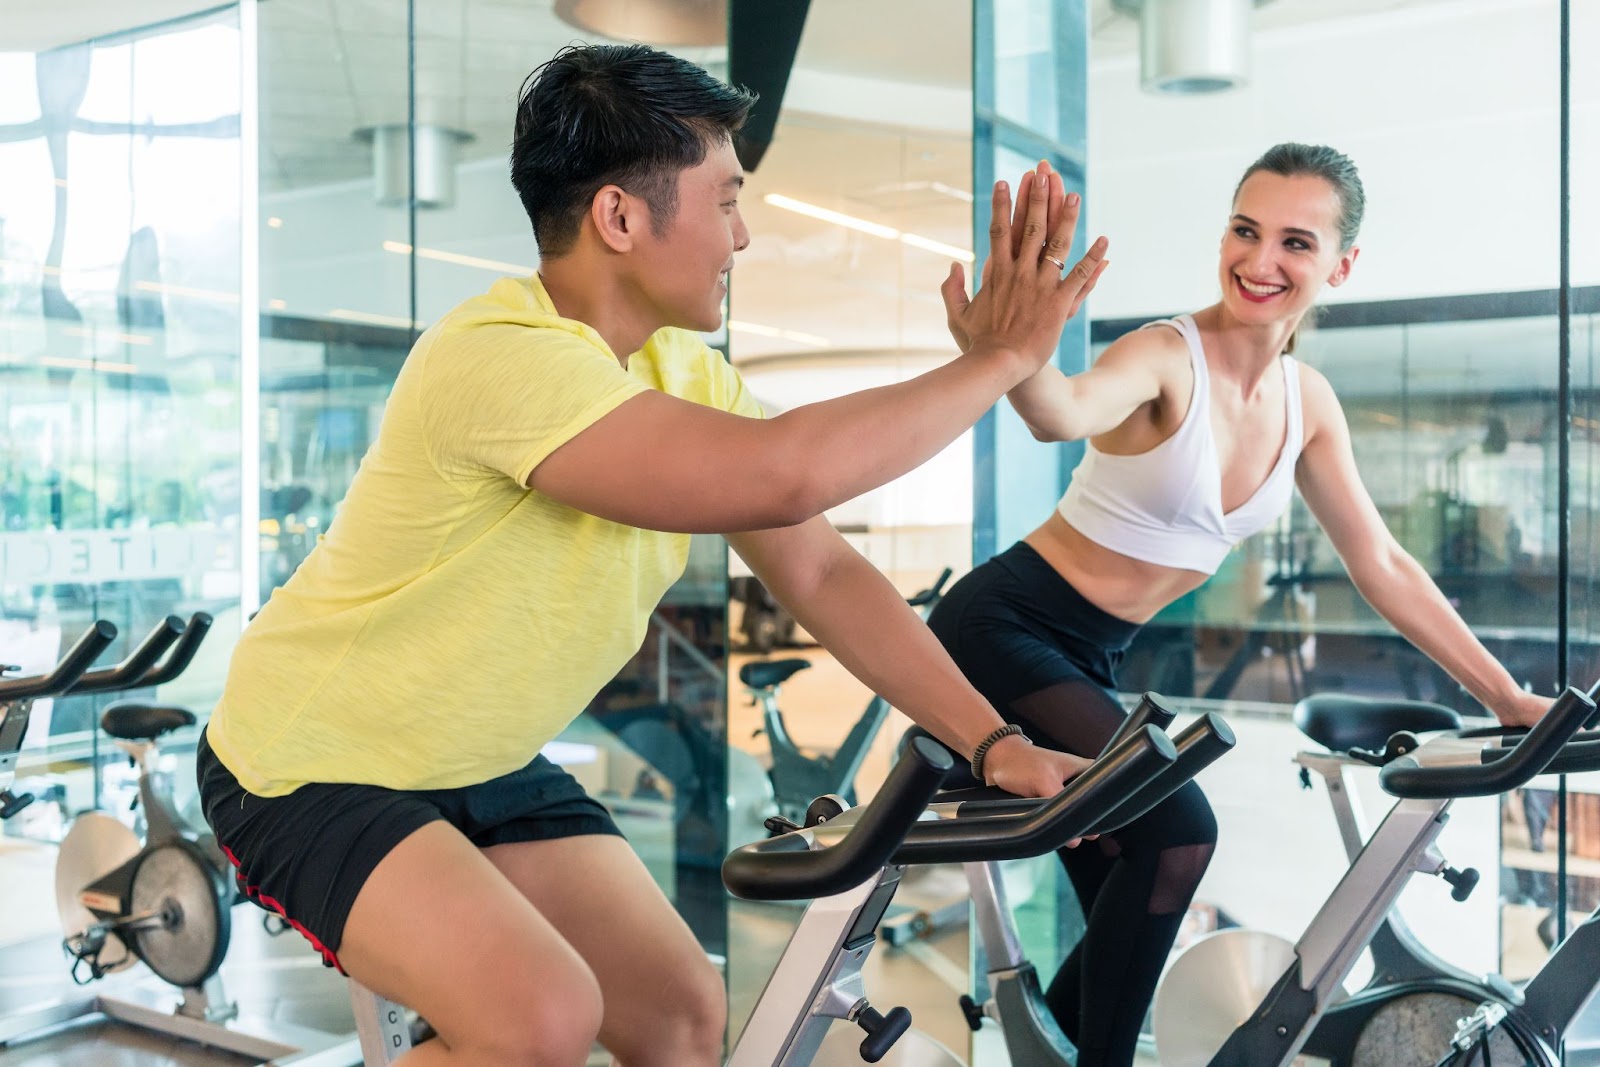 Man and woman high-fiving each other in Spin class